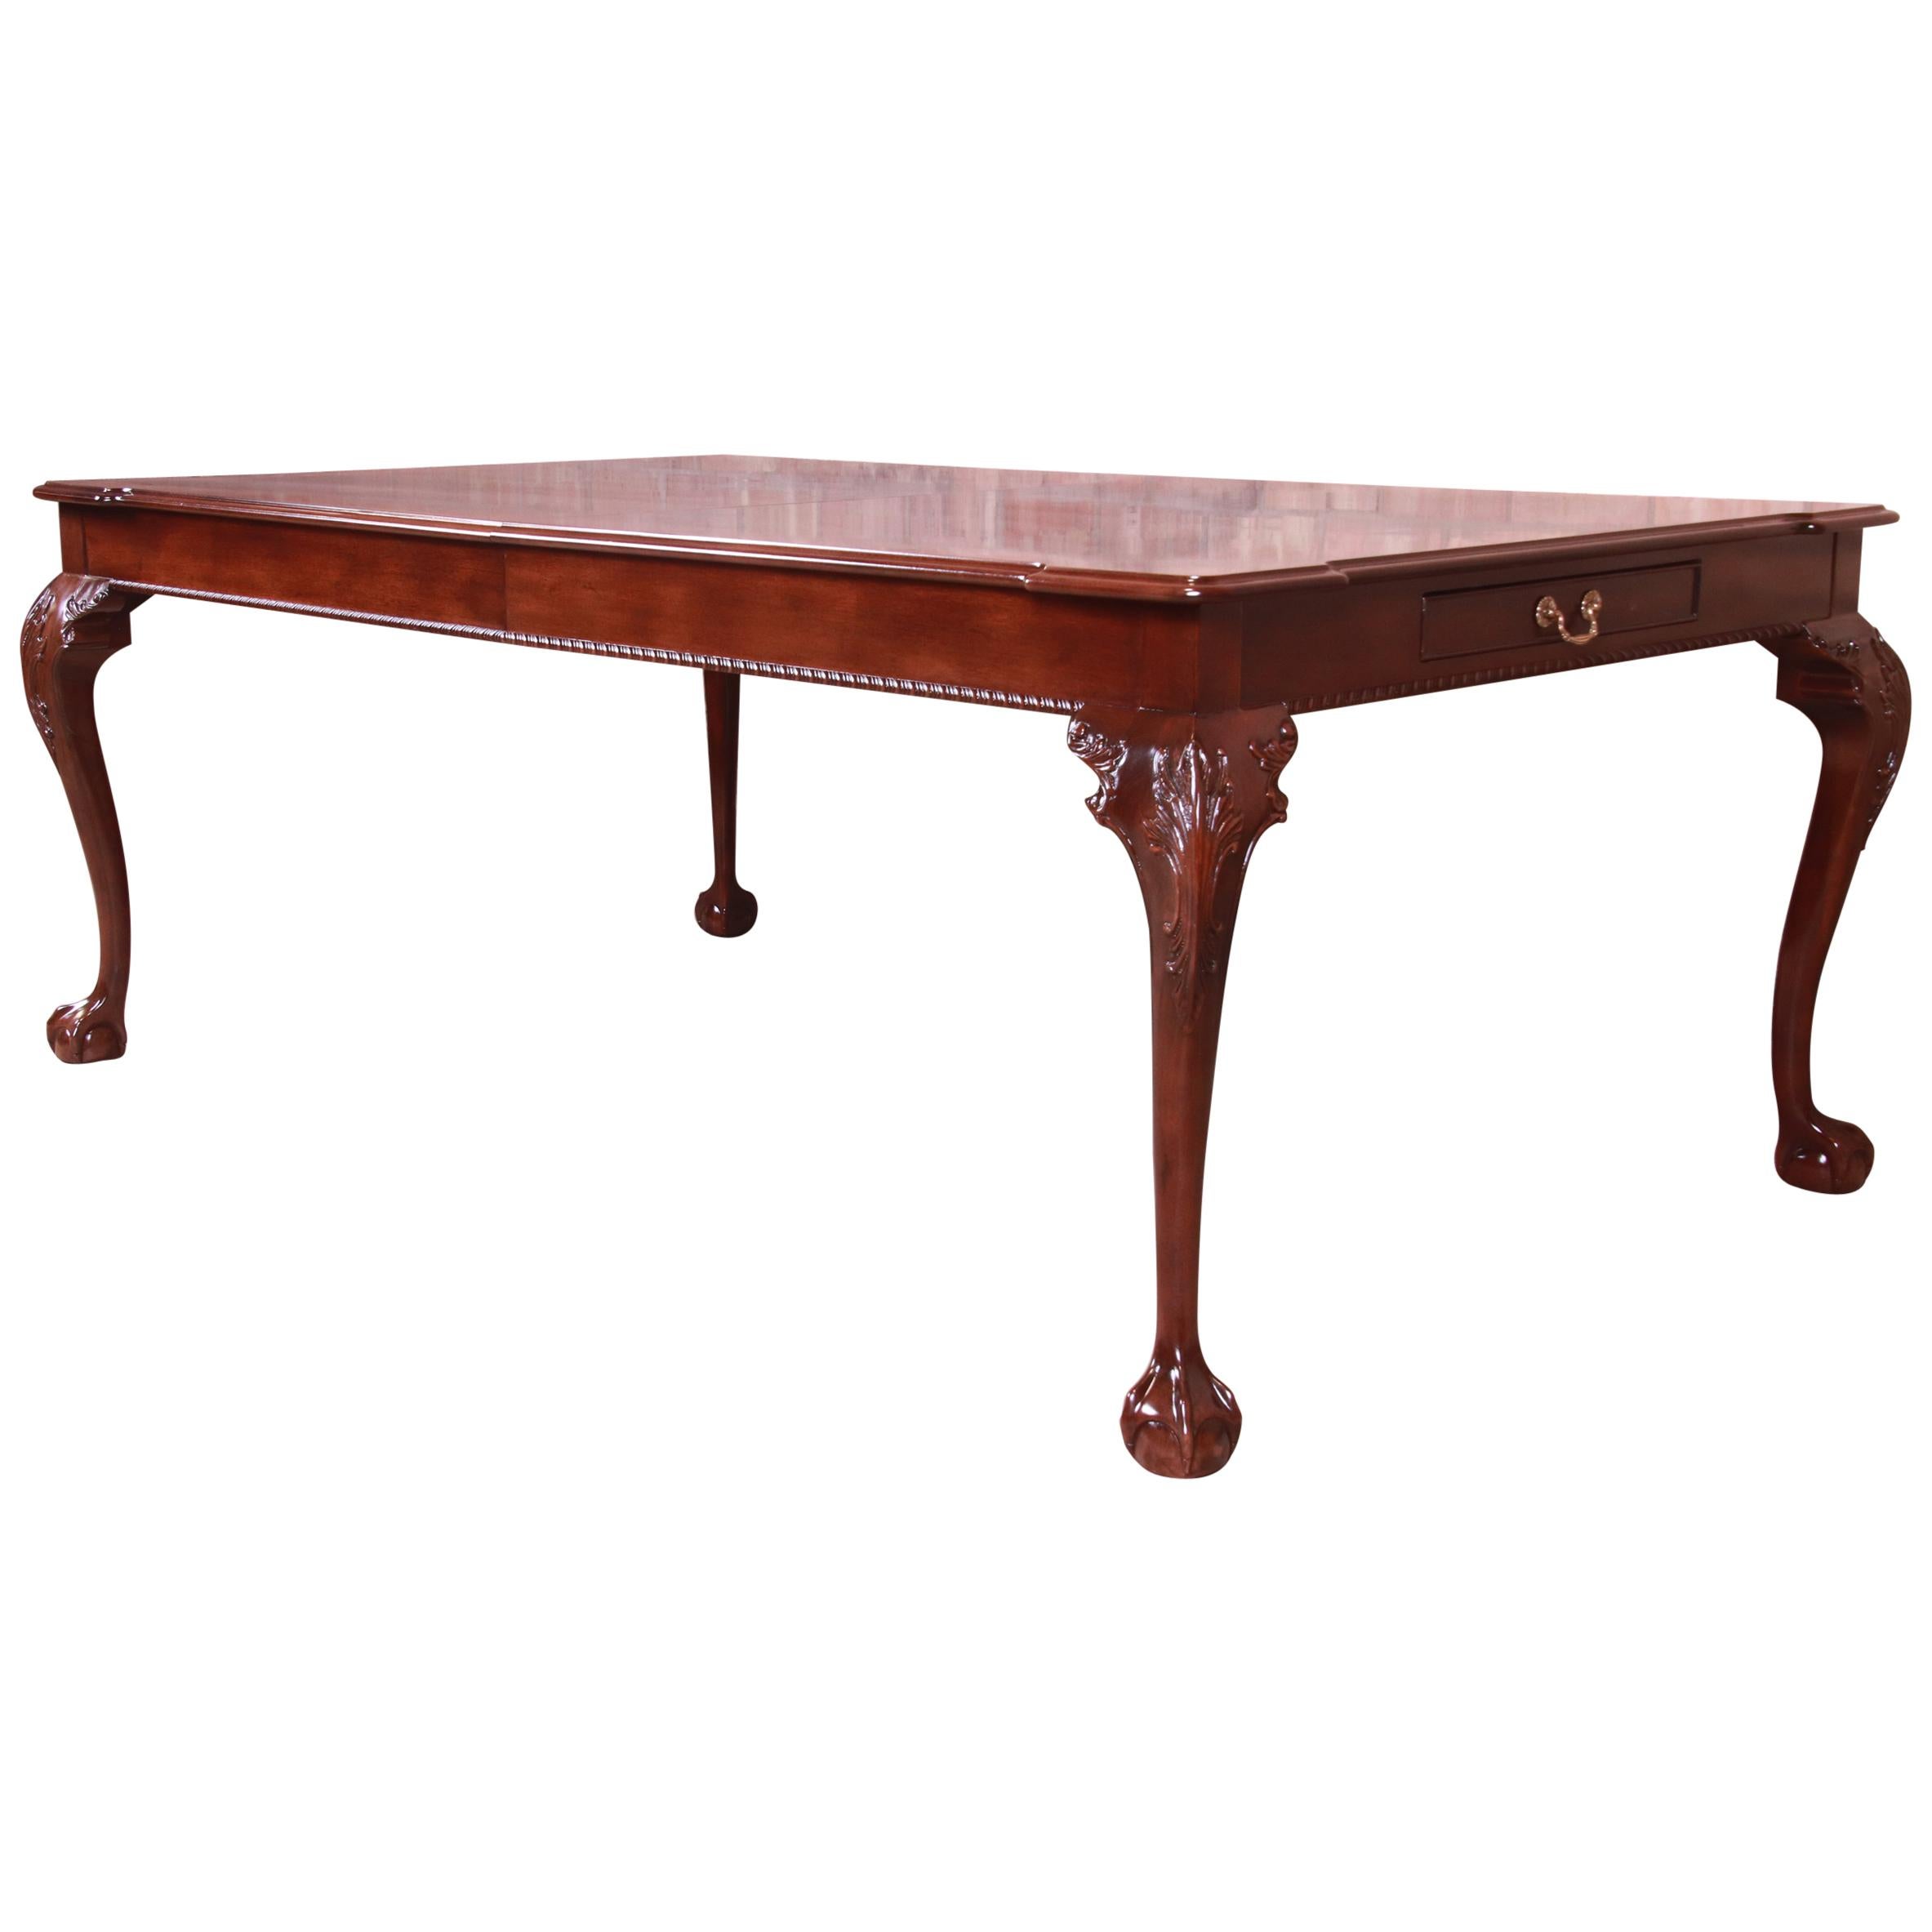 Henredon Chippendale Banded Mahogany Extension Dining Table, Newly Refinished